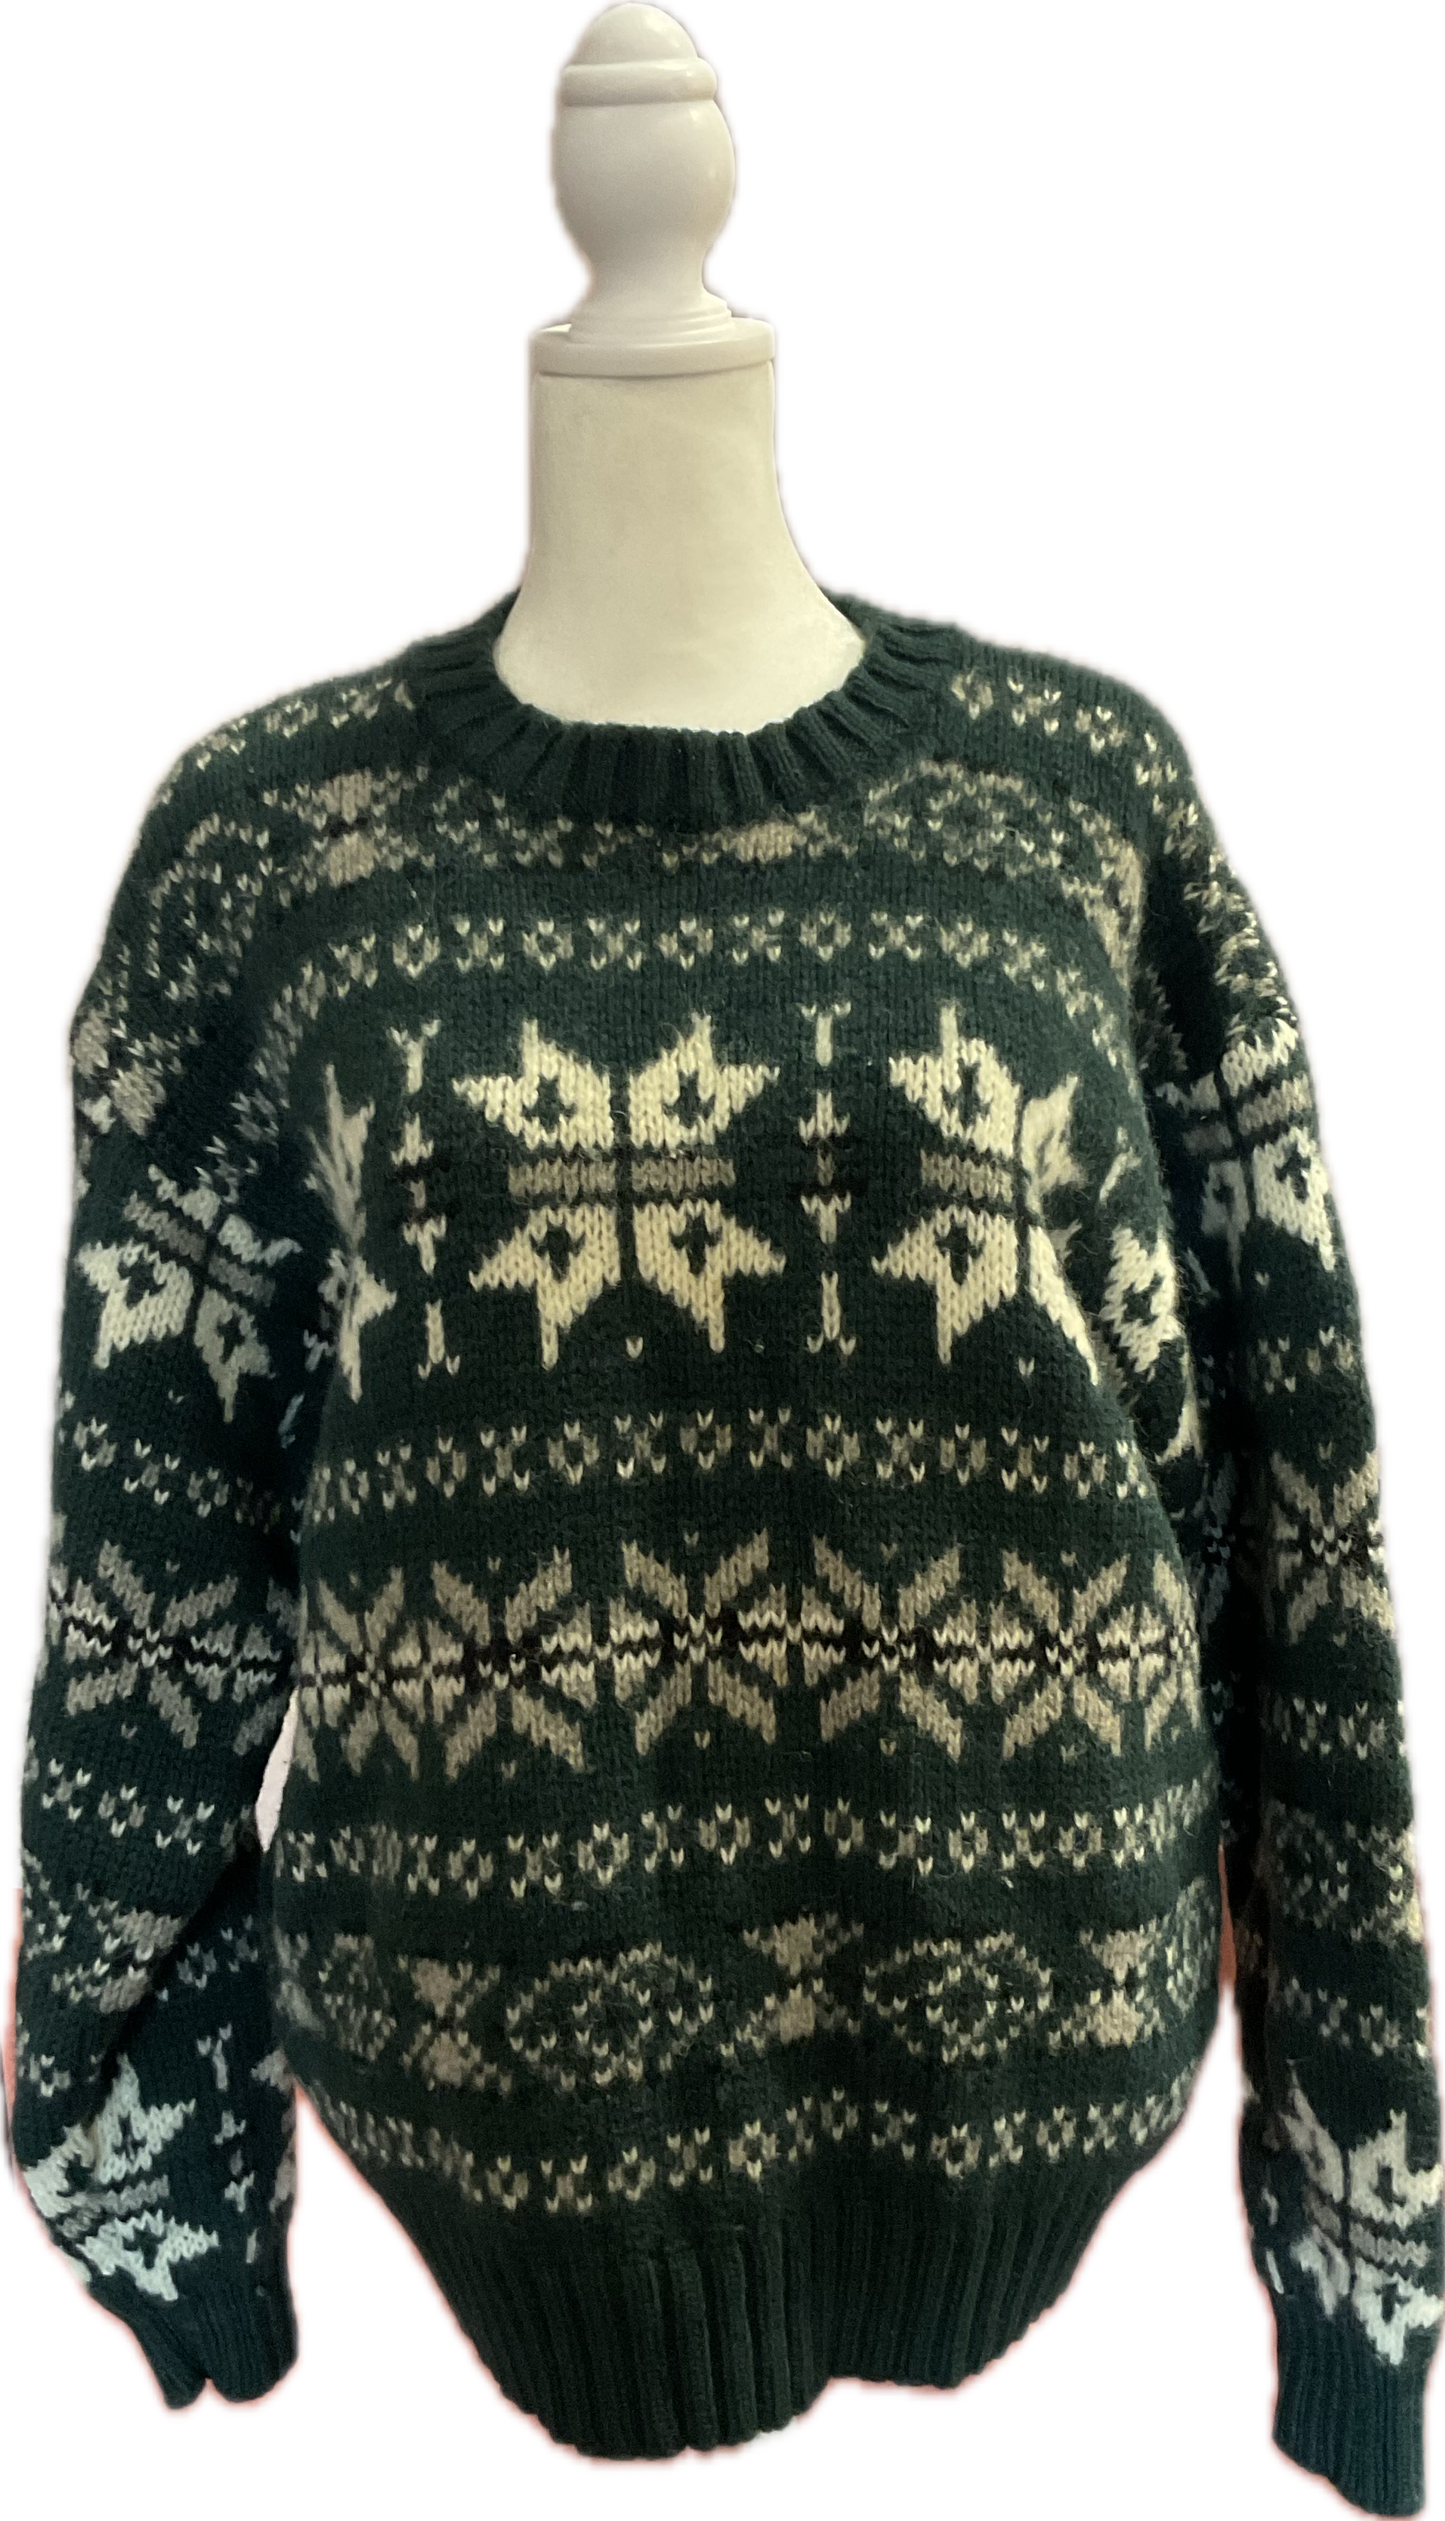 Vintage American Eagle Outfitters Green, White & Grey Wool Knit Snowflake Crewnek Sweater (size large)